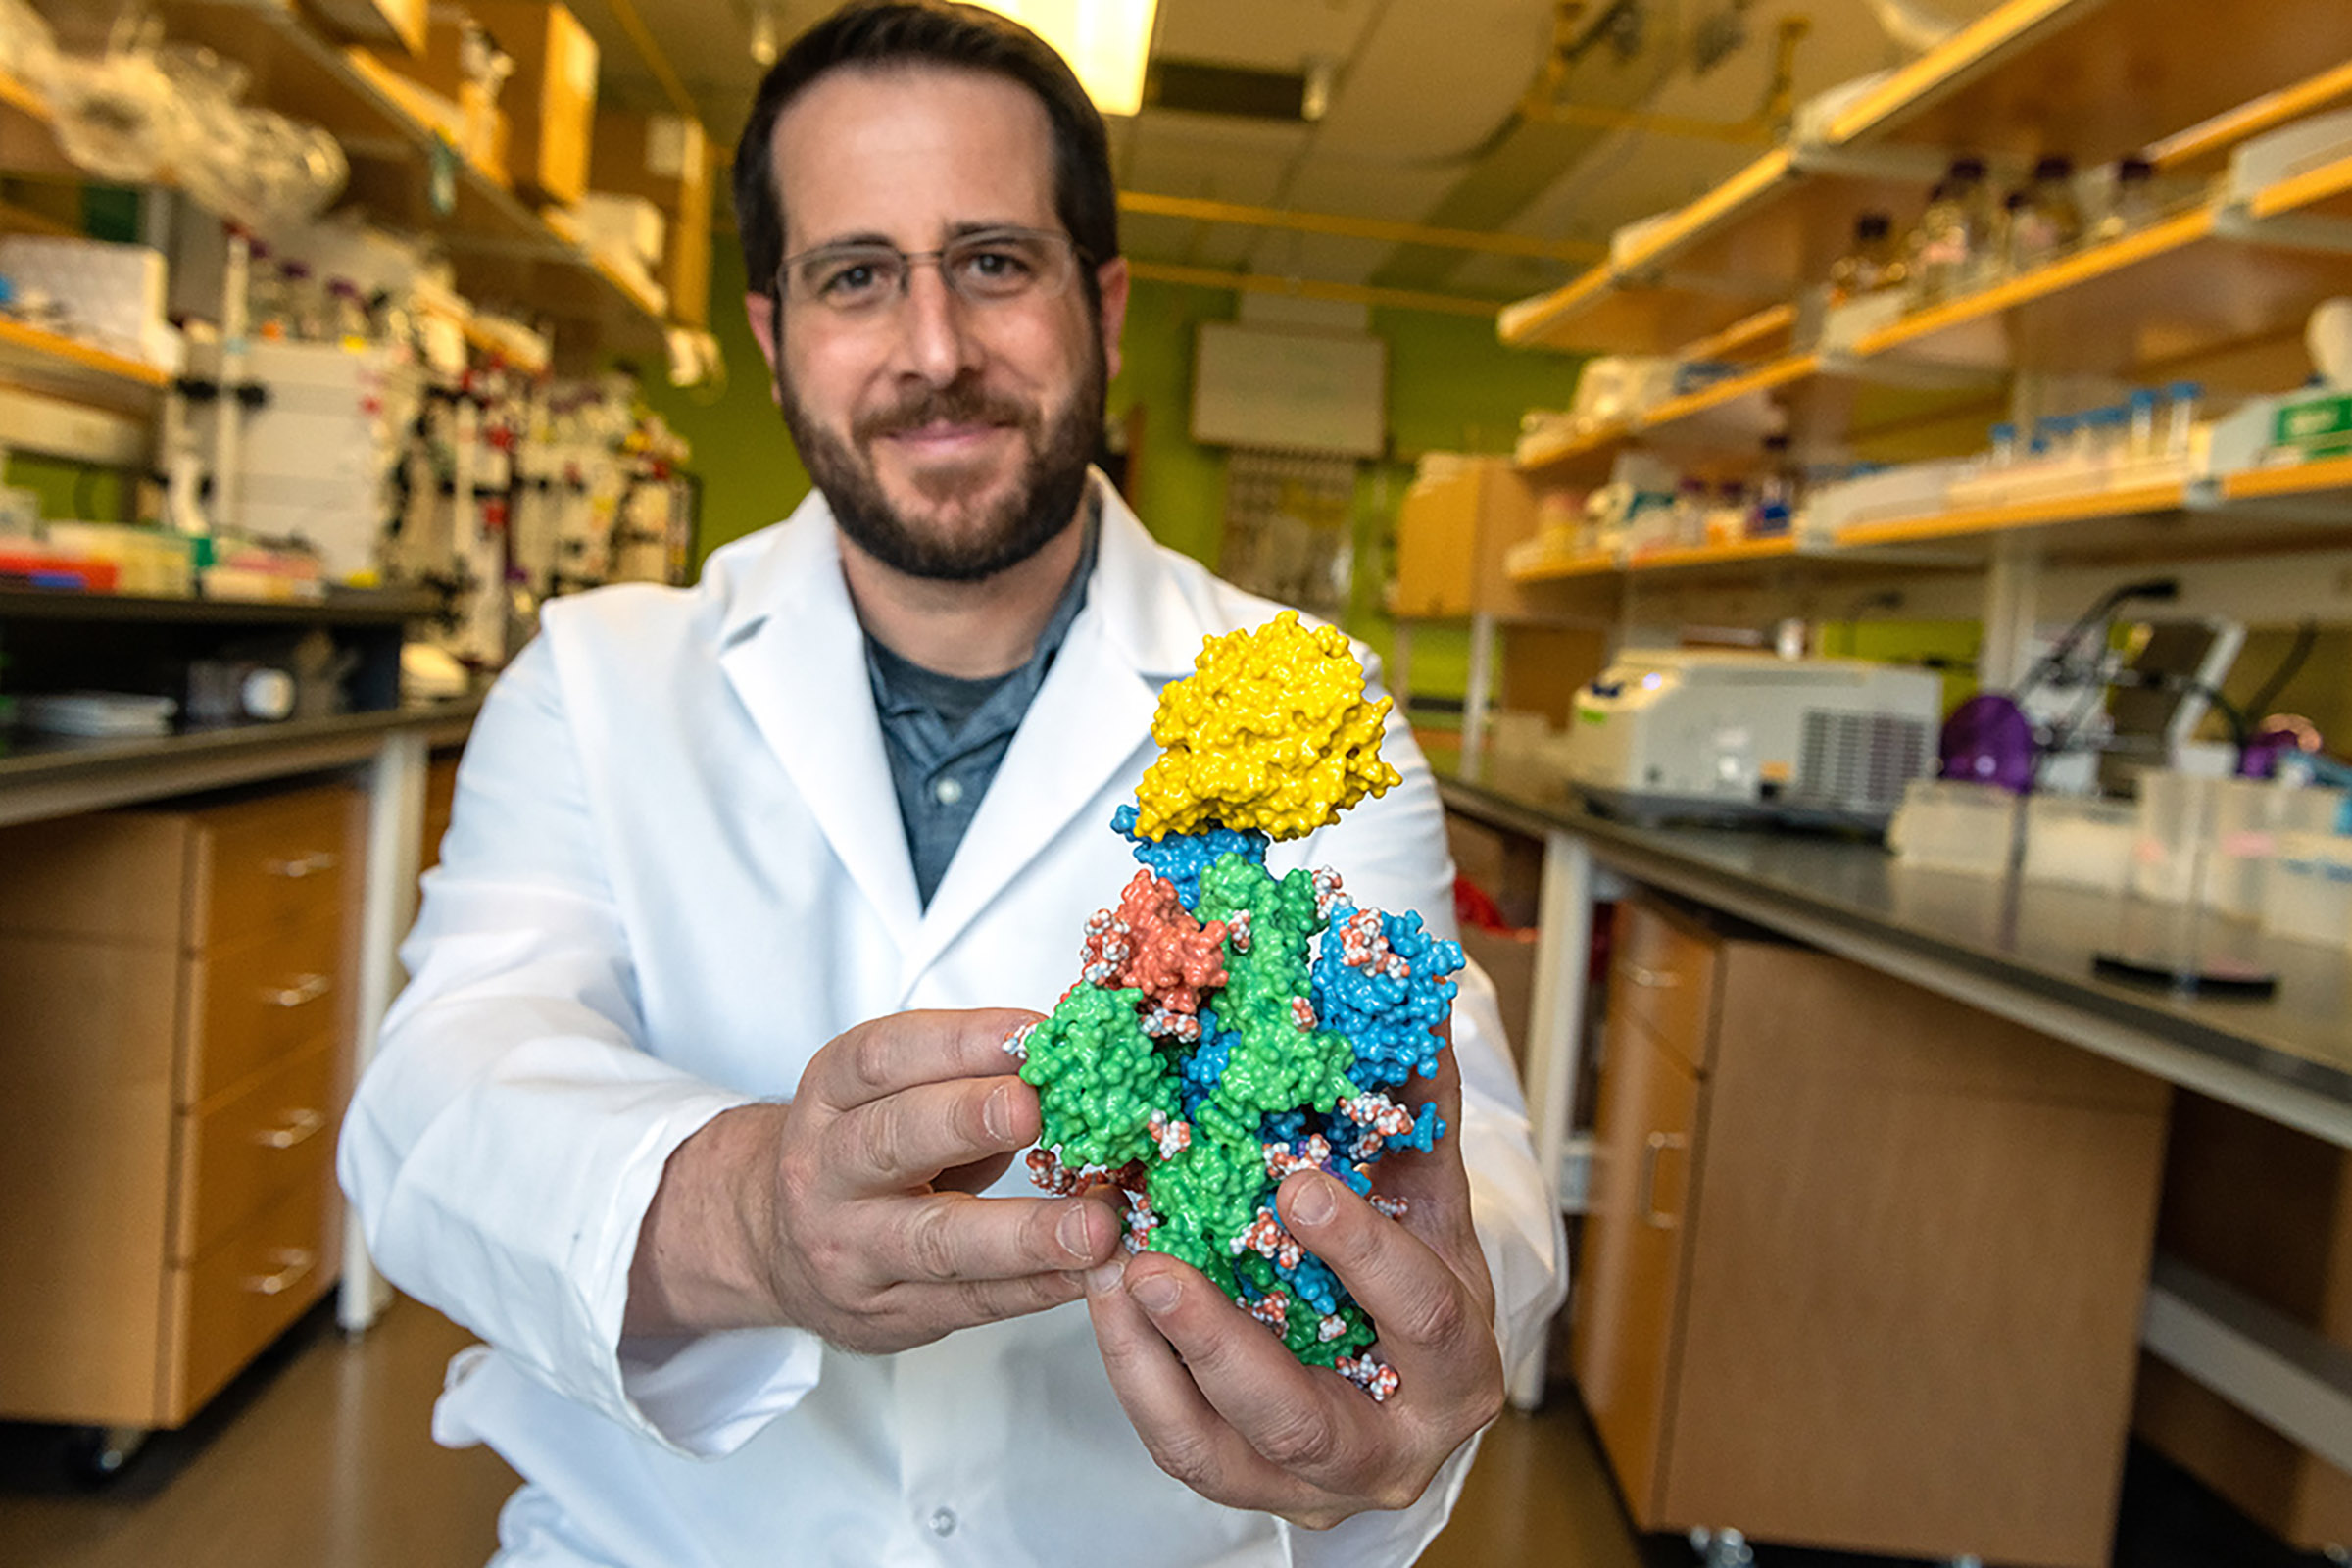 A man in a white lab coat holds a model of a viral protein